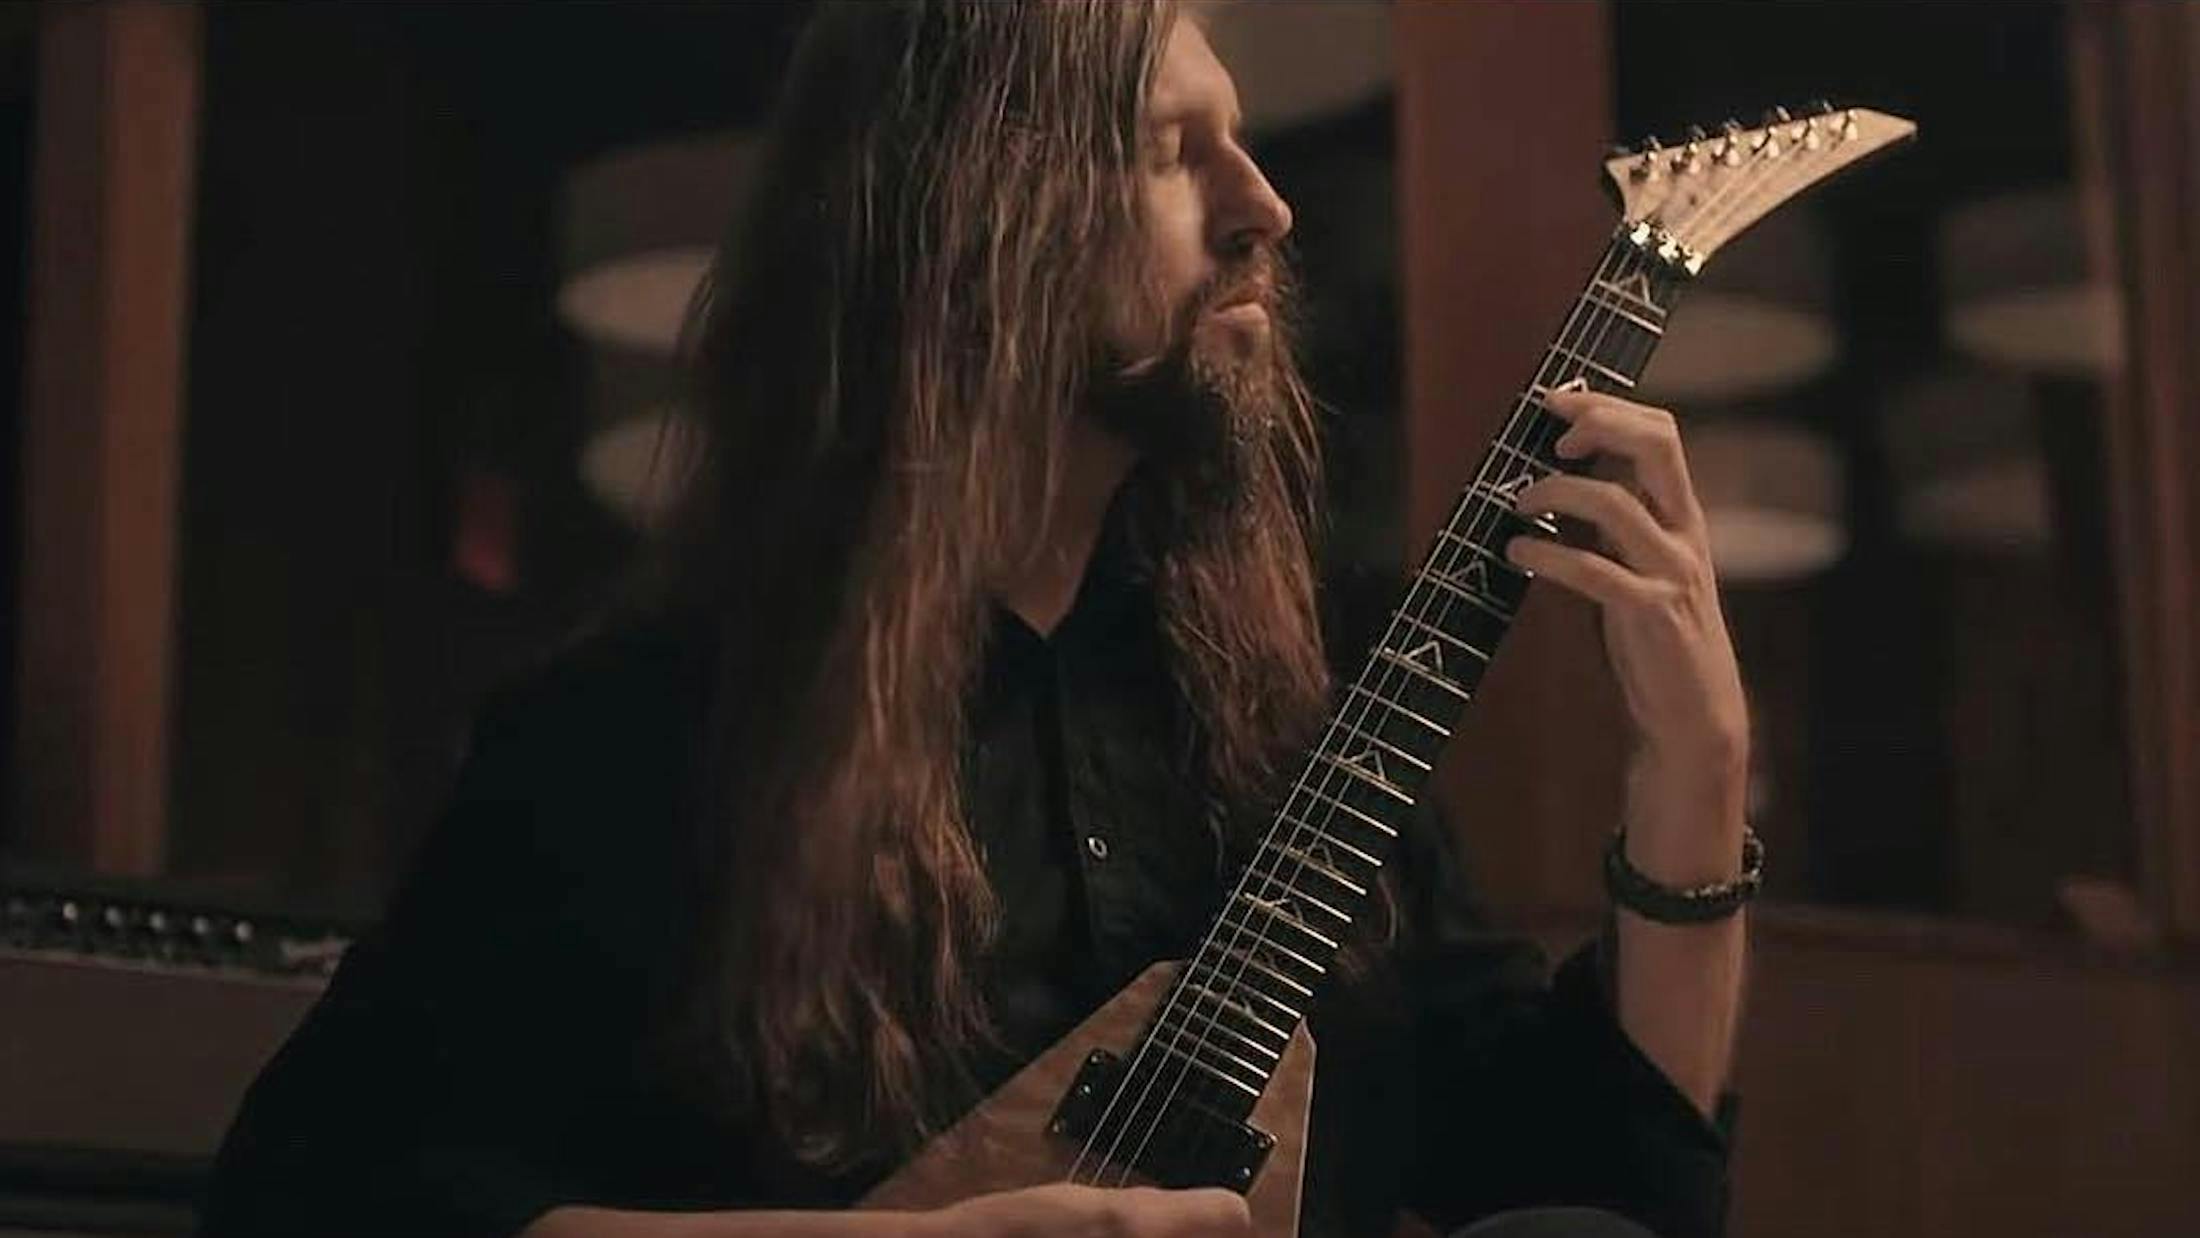 All That Remains Guitarist Oli Herbert's Cause Of Death Has Been Announced